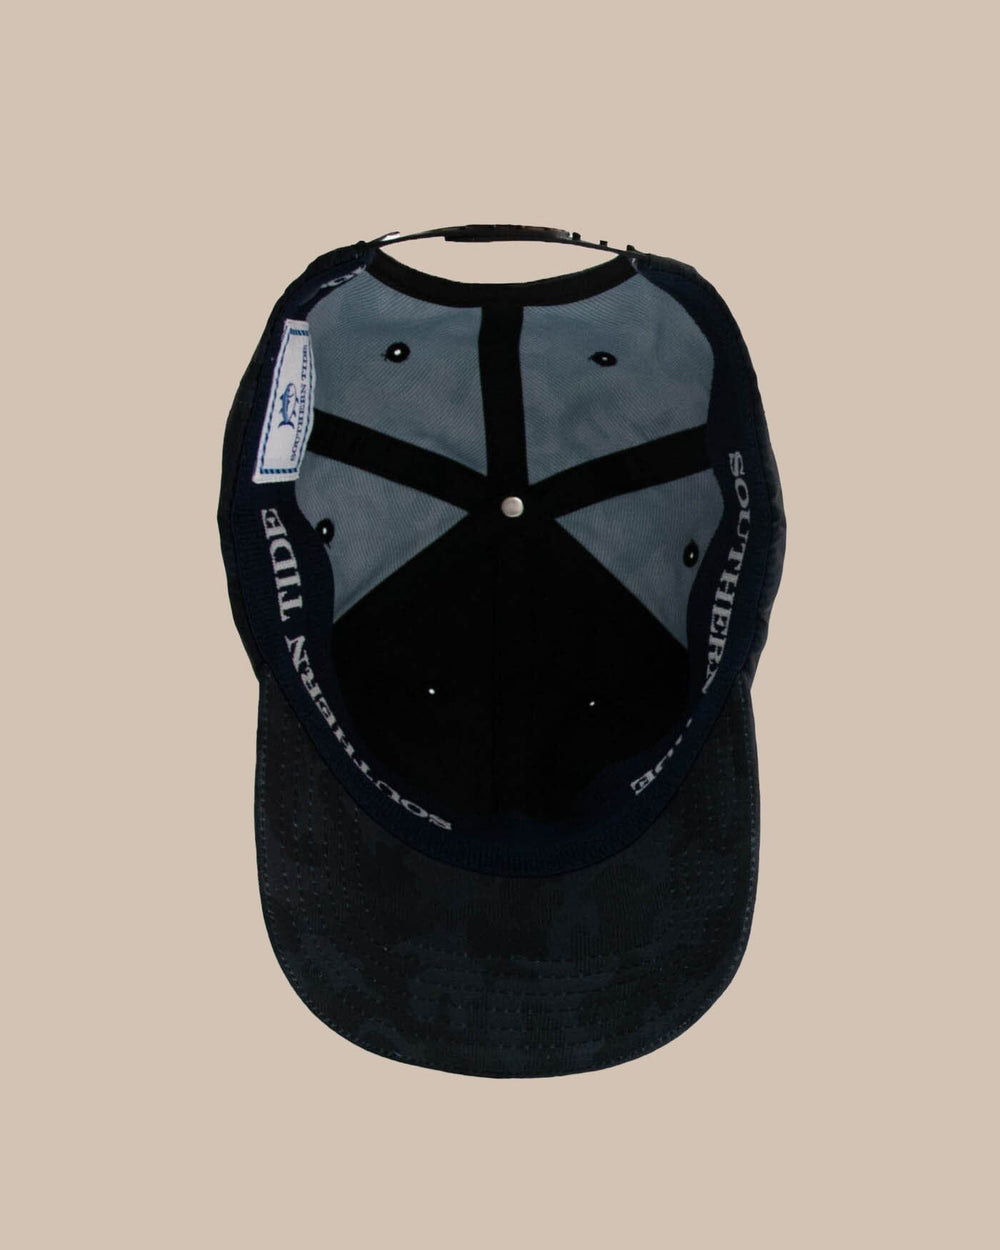 The back view of the Southern Tide Camo Printed Performance Hat by Southern Tide - Caviar Black